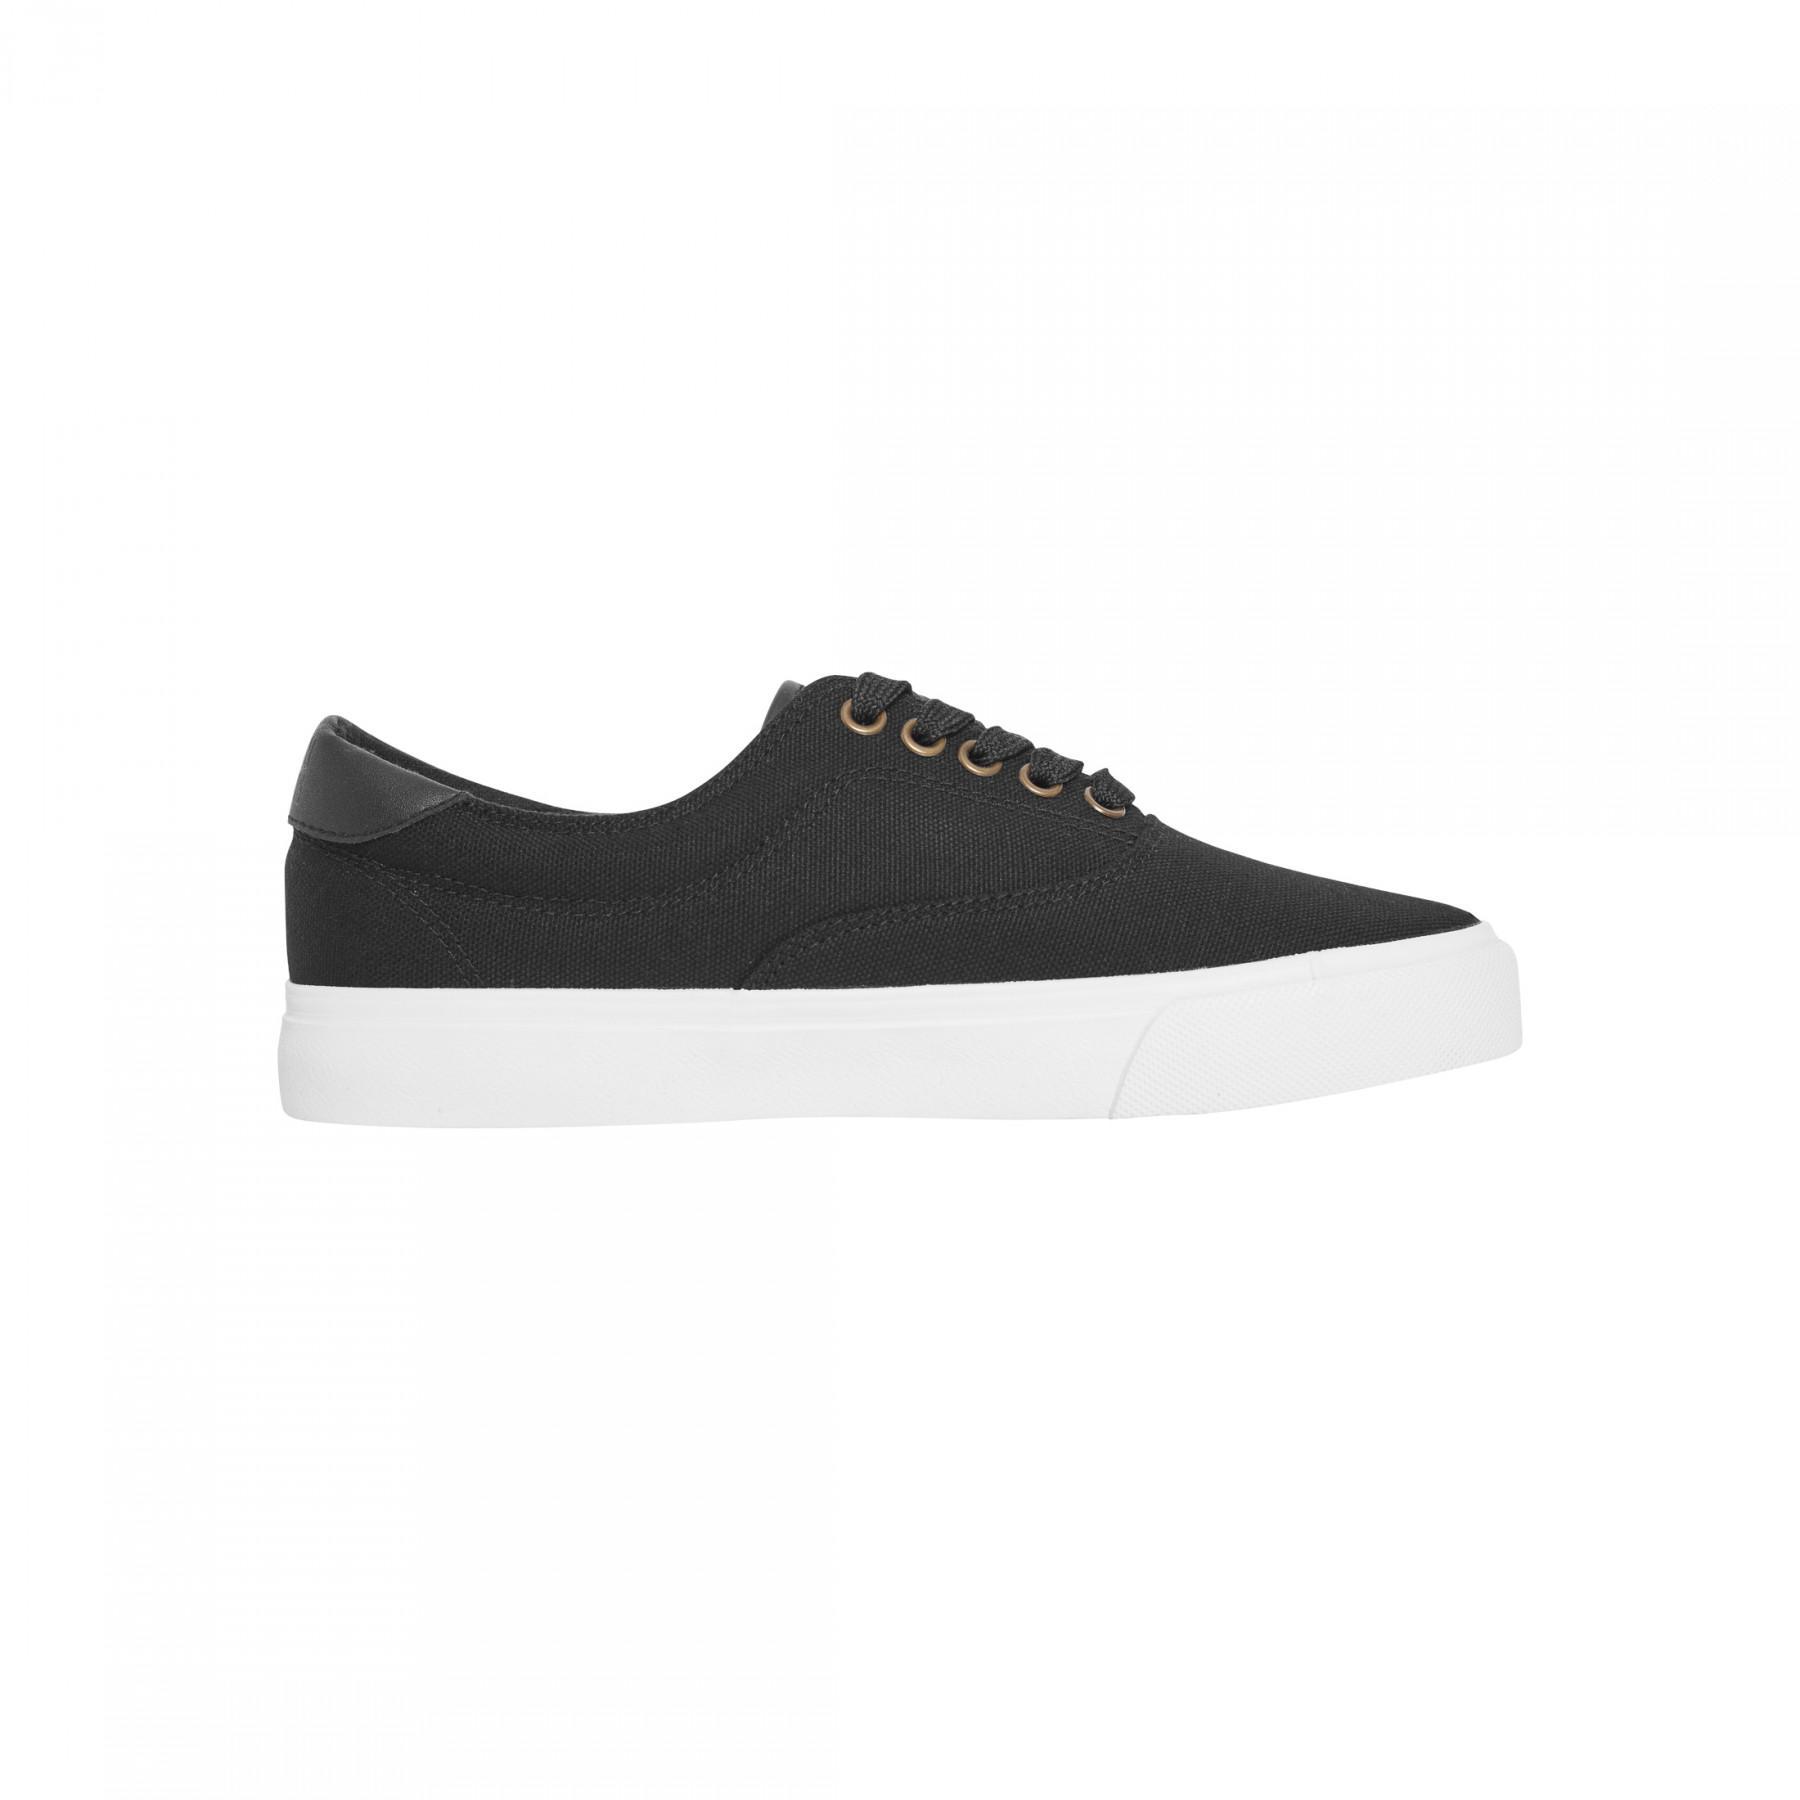 Zapatillas Urban Classic low with lace